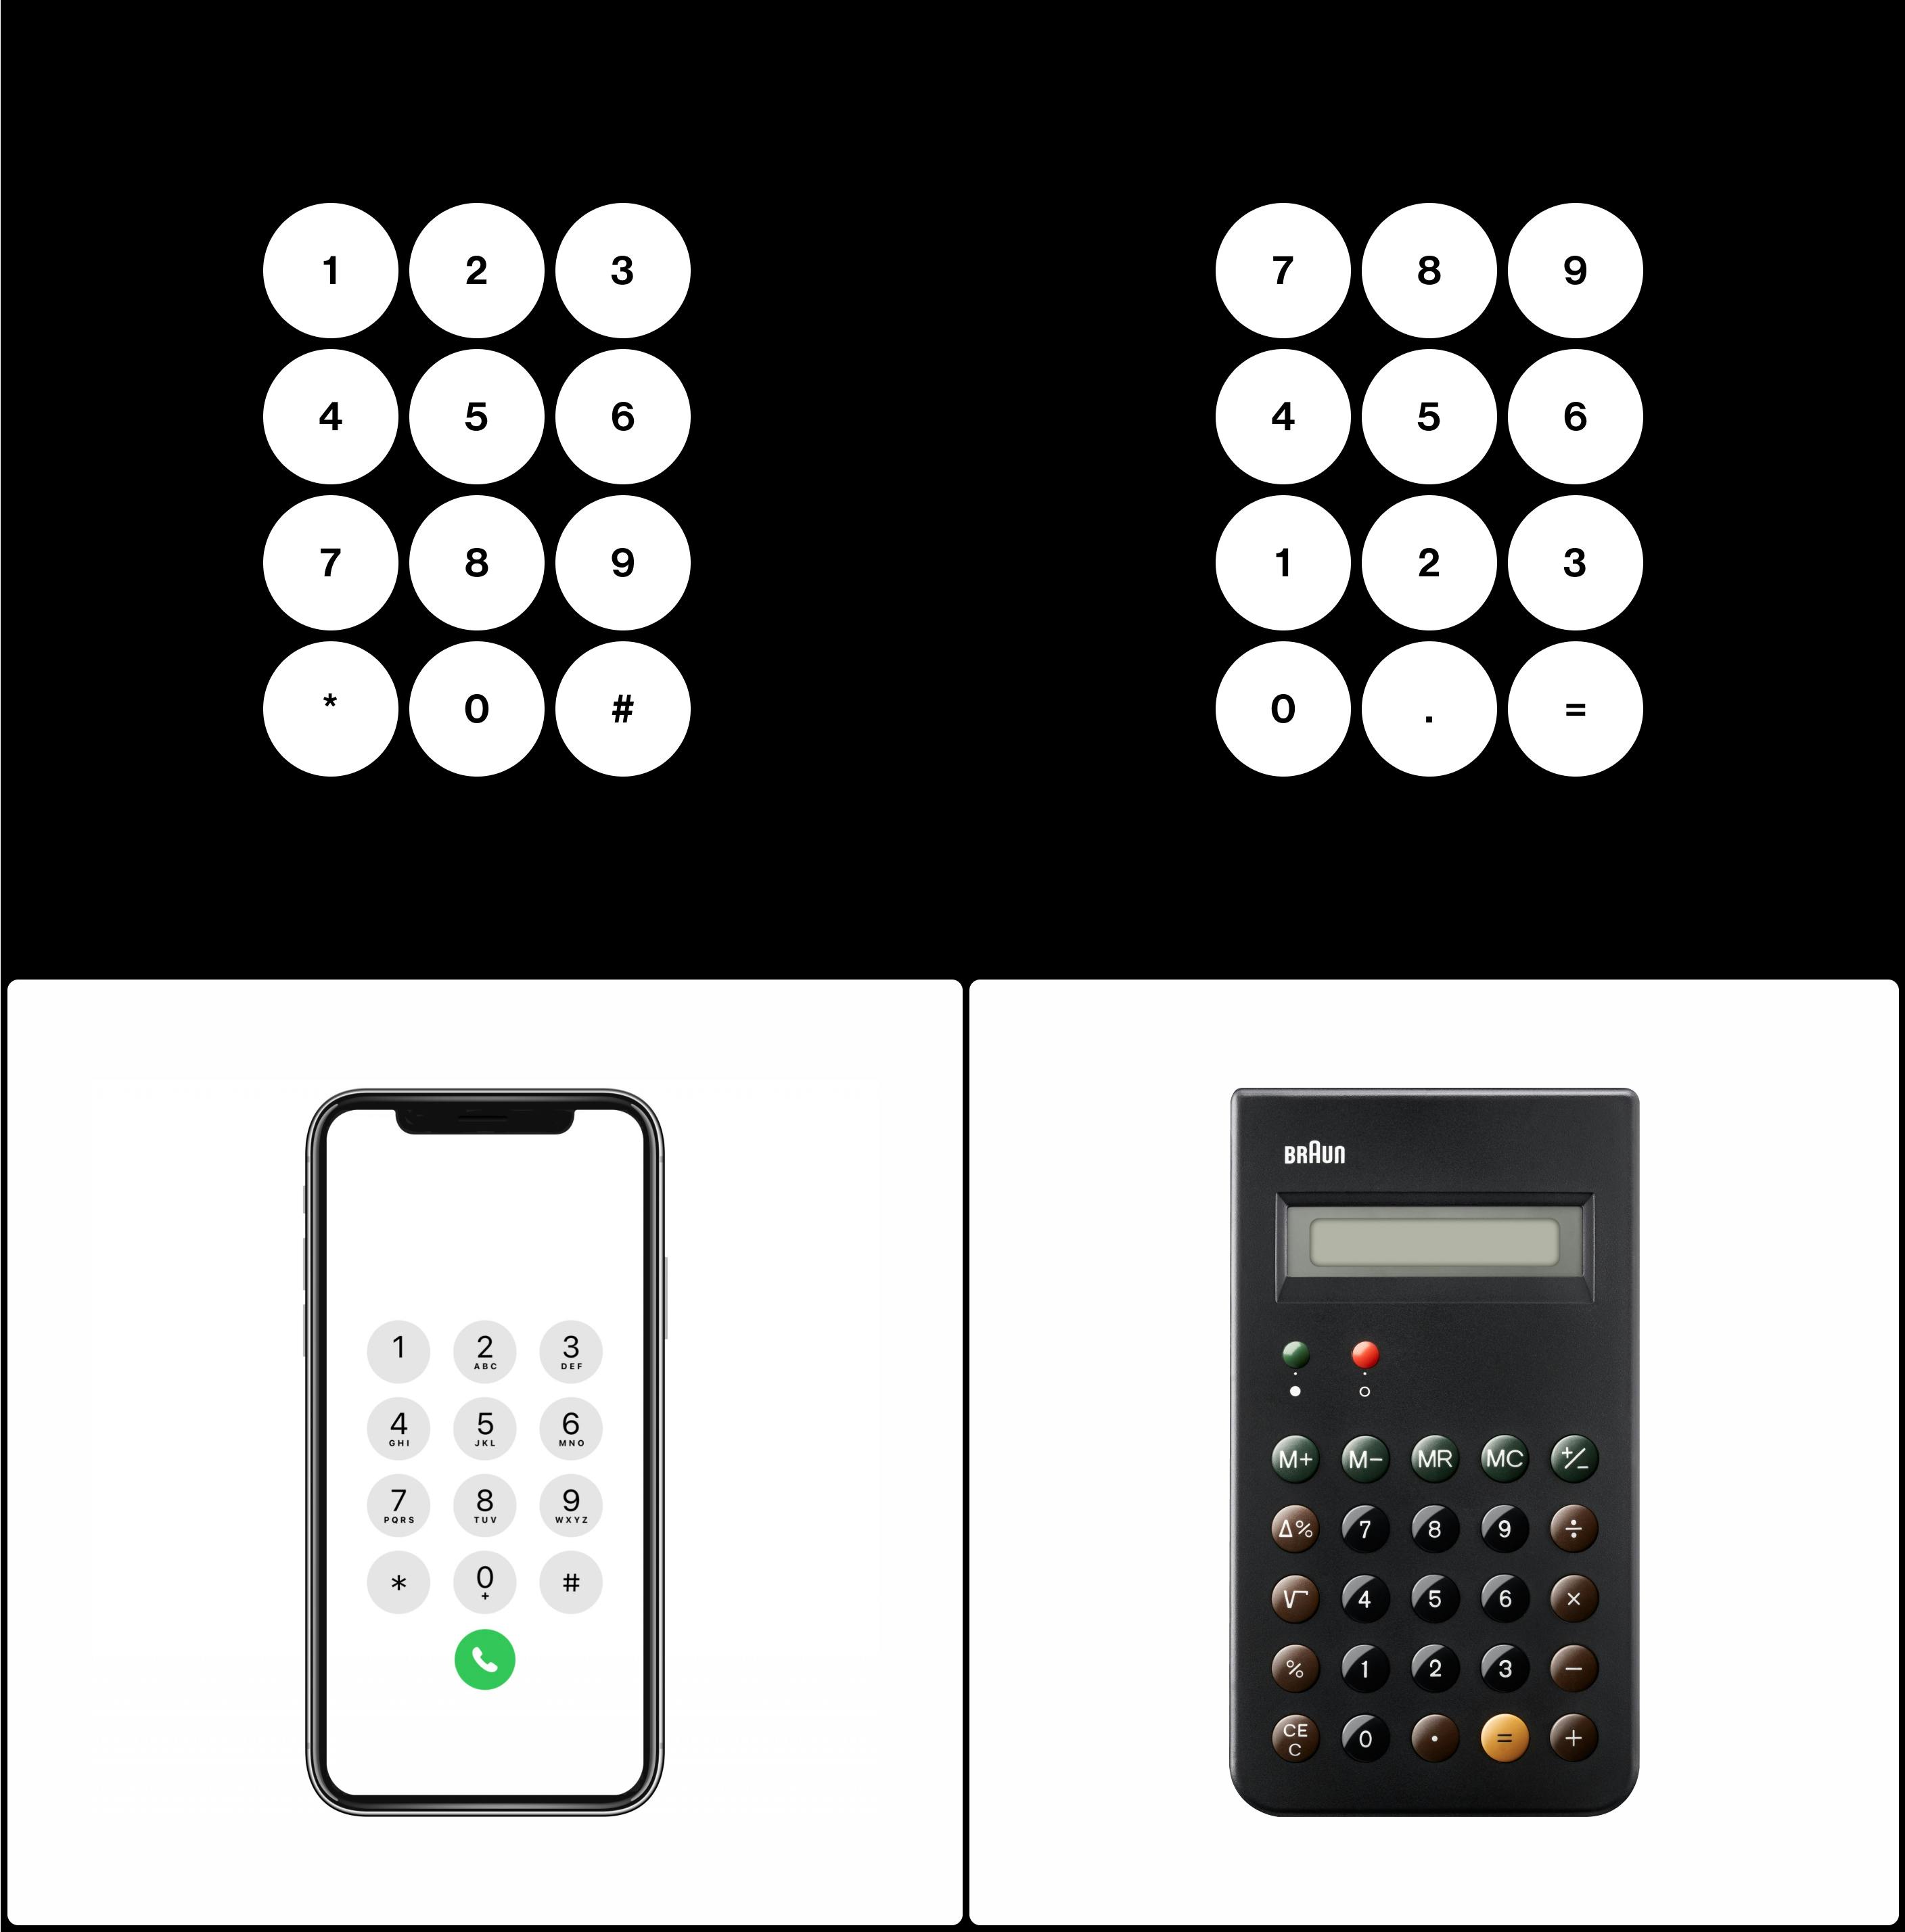 telefone and calculator side by side